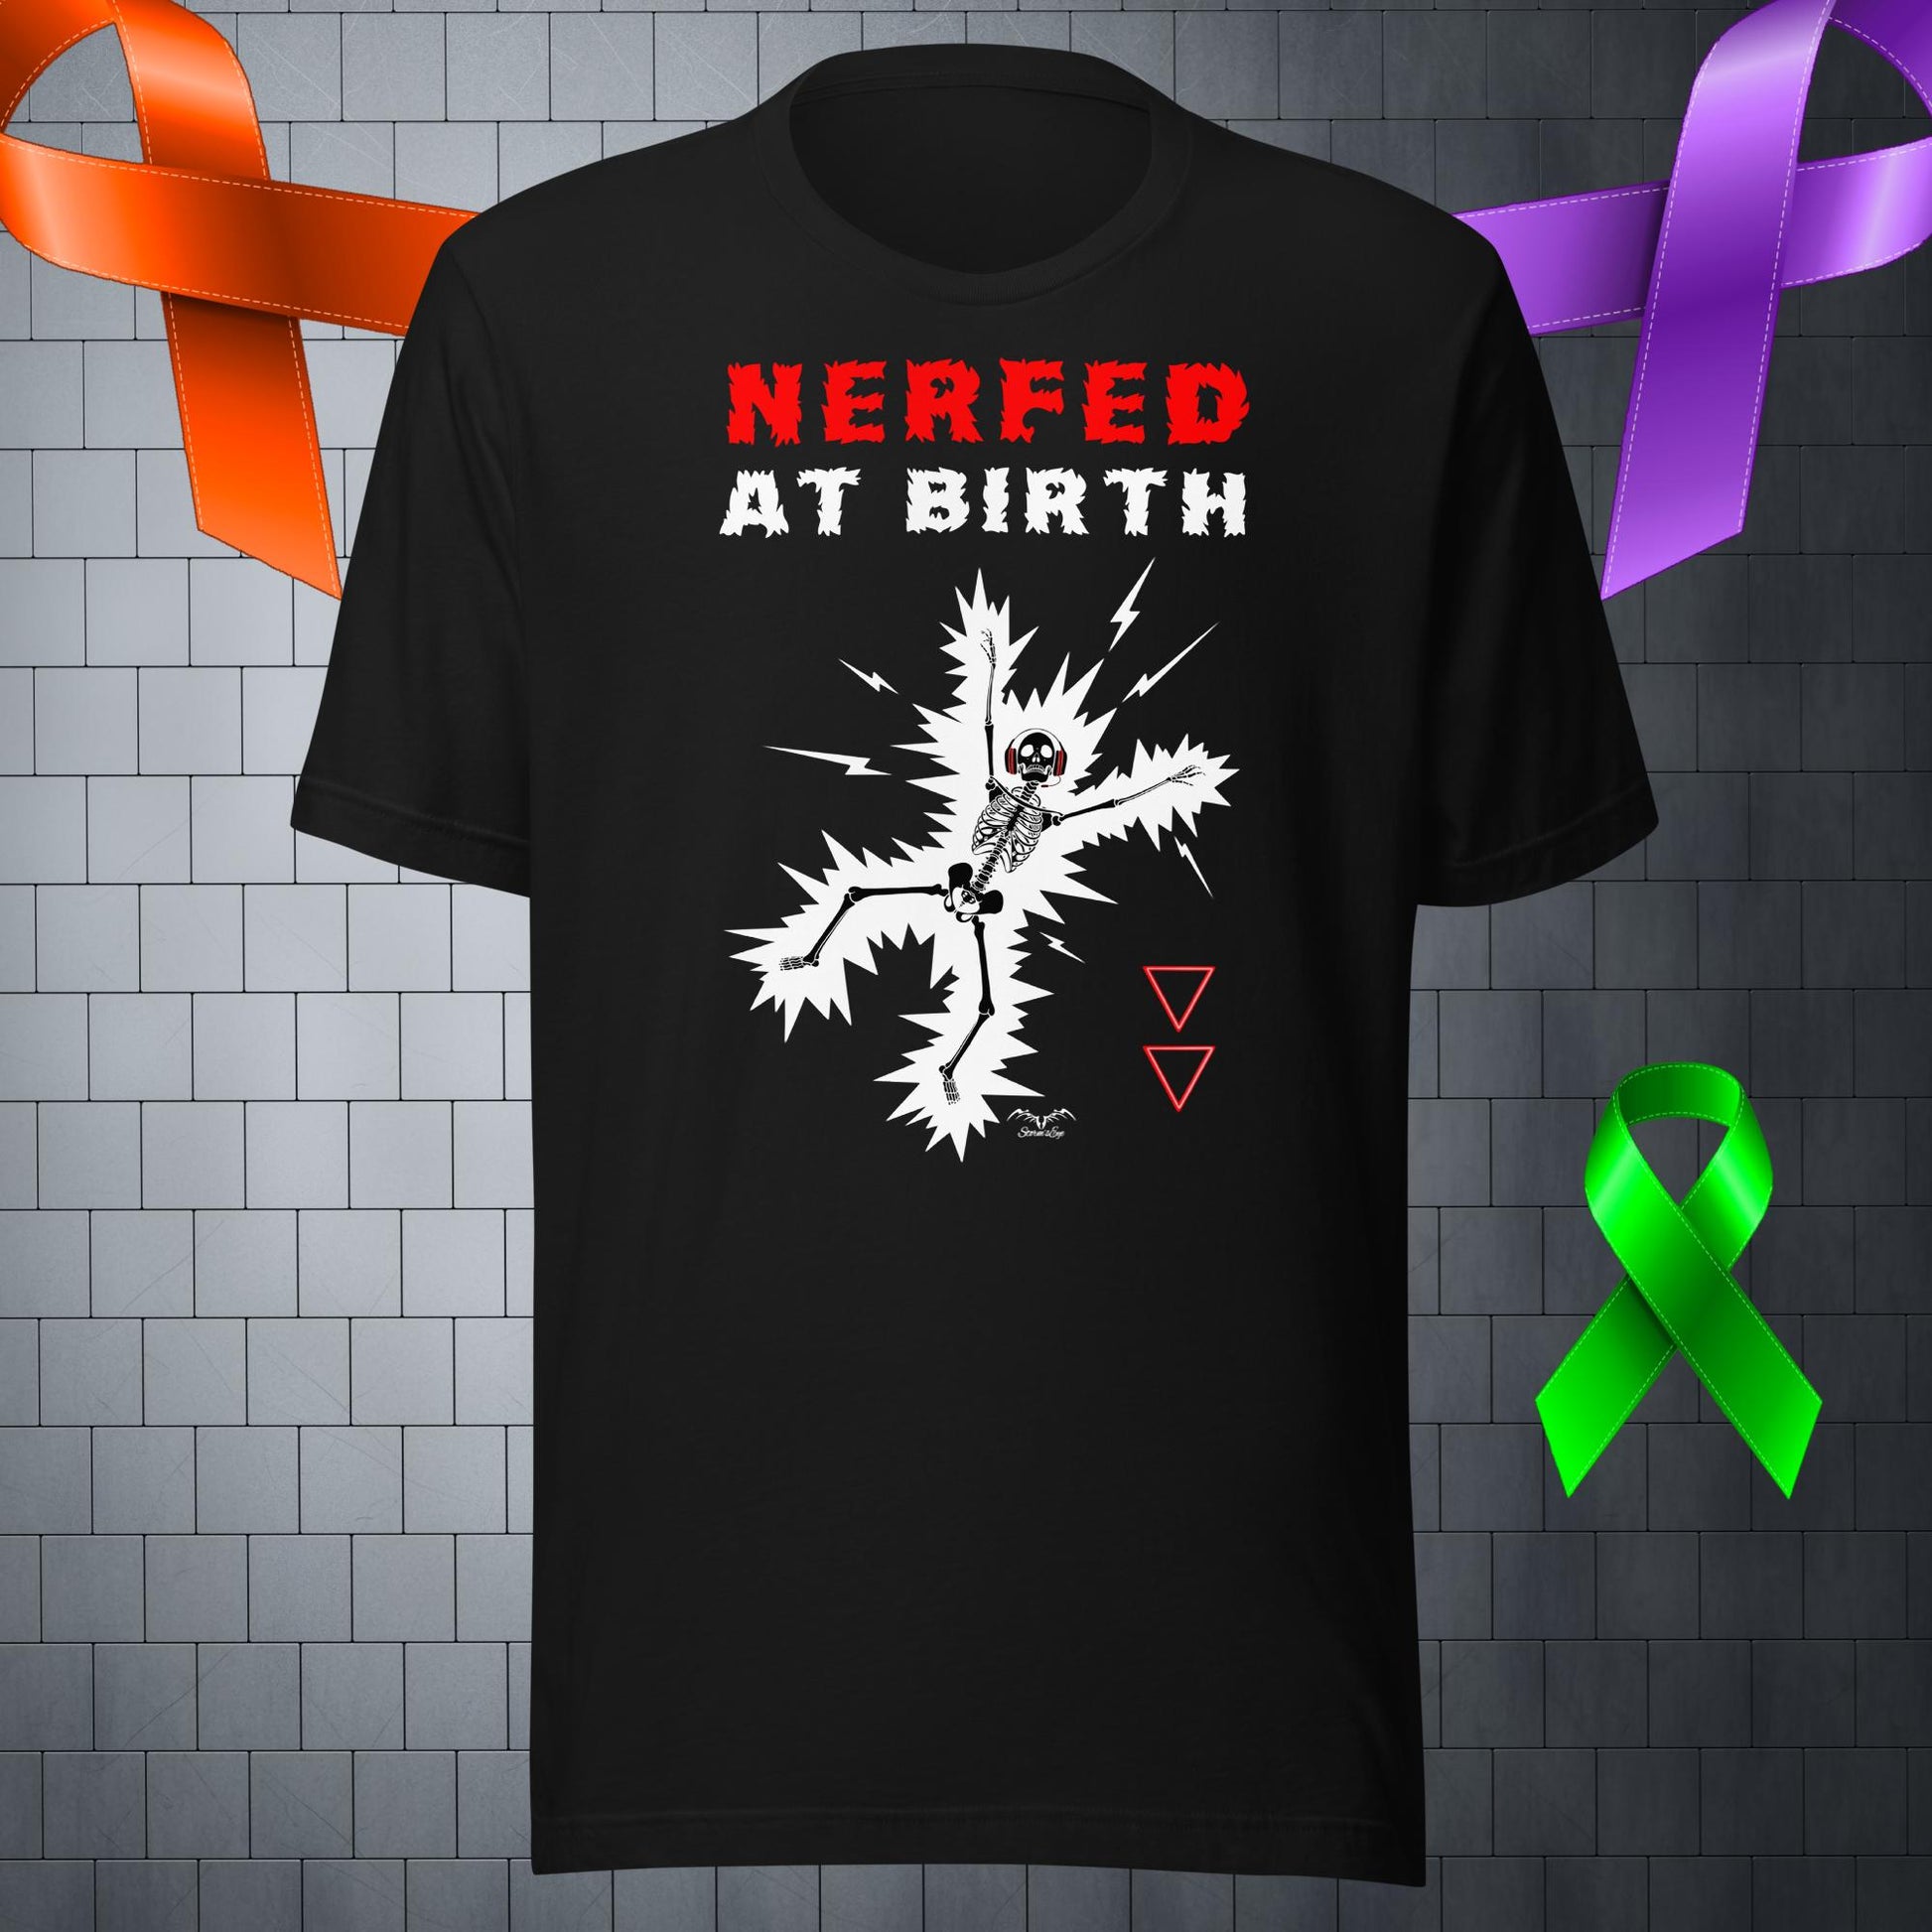 funny nerfed at birth gamer disability t-shirt black by stormseye design